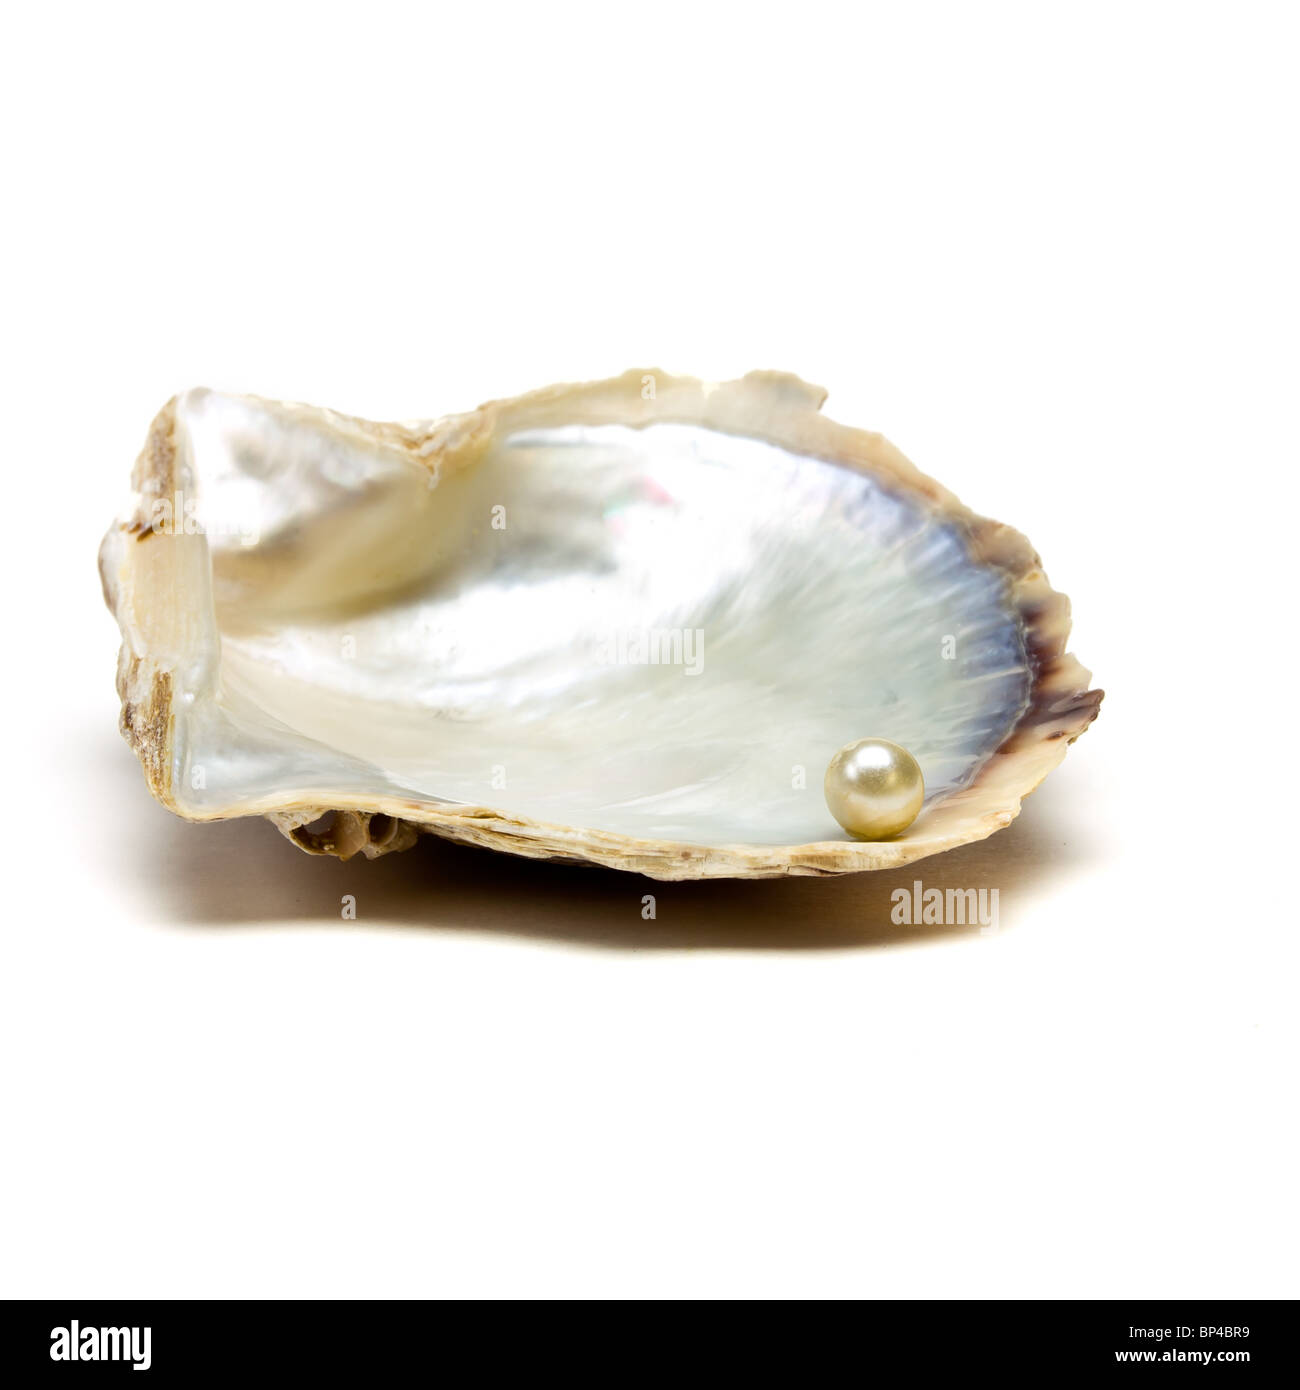 Pearl resting on open oyster shell to depict wealth concept isolated against white. Stock Photo